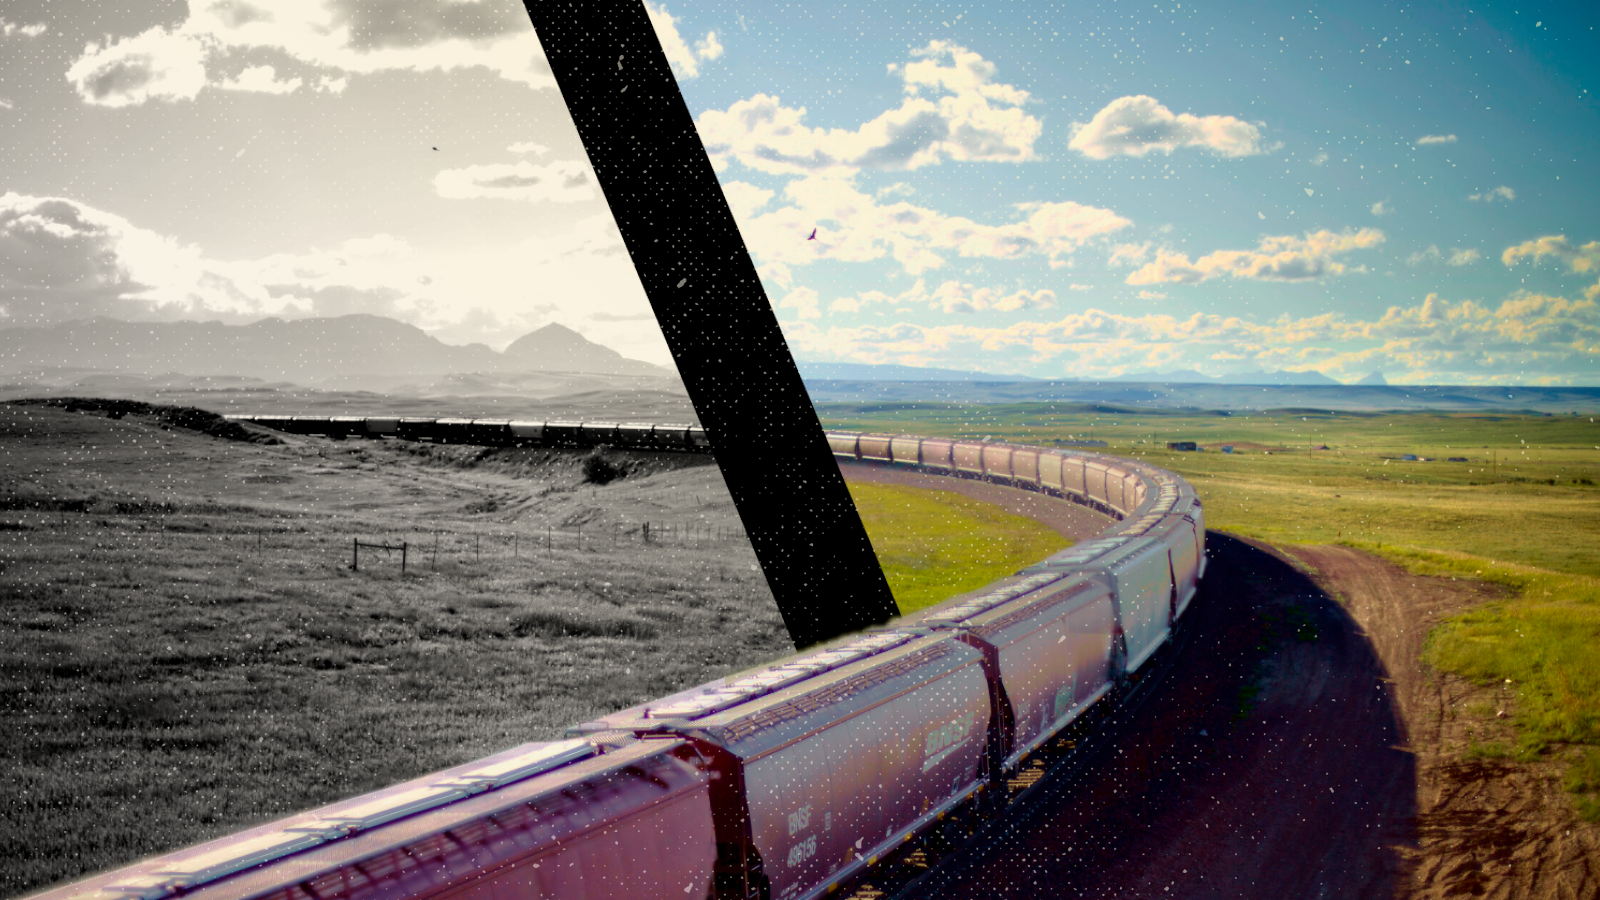 An extremely long freight train curving into the distance in the open country of Montana with mountains in the distance.